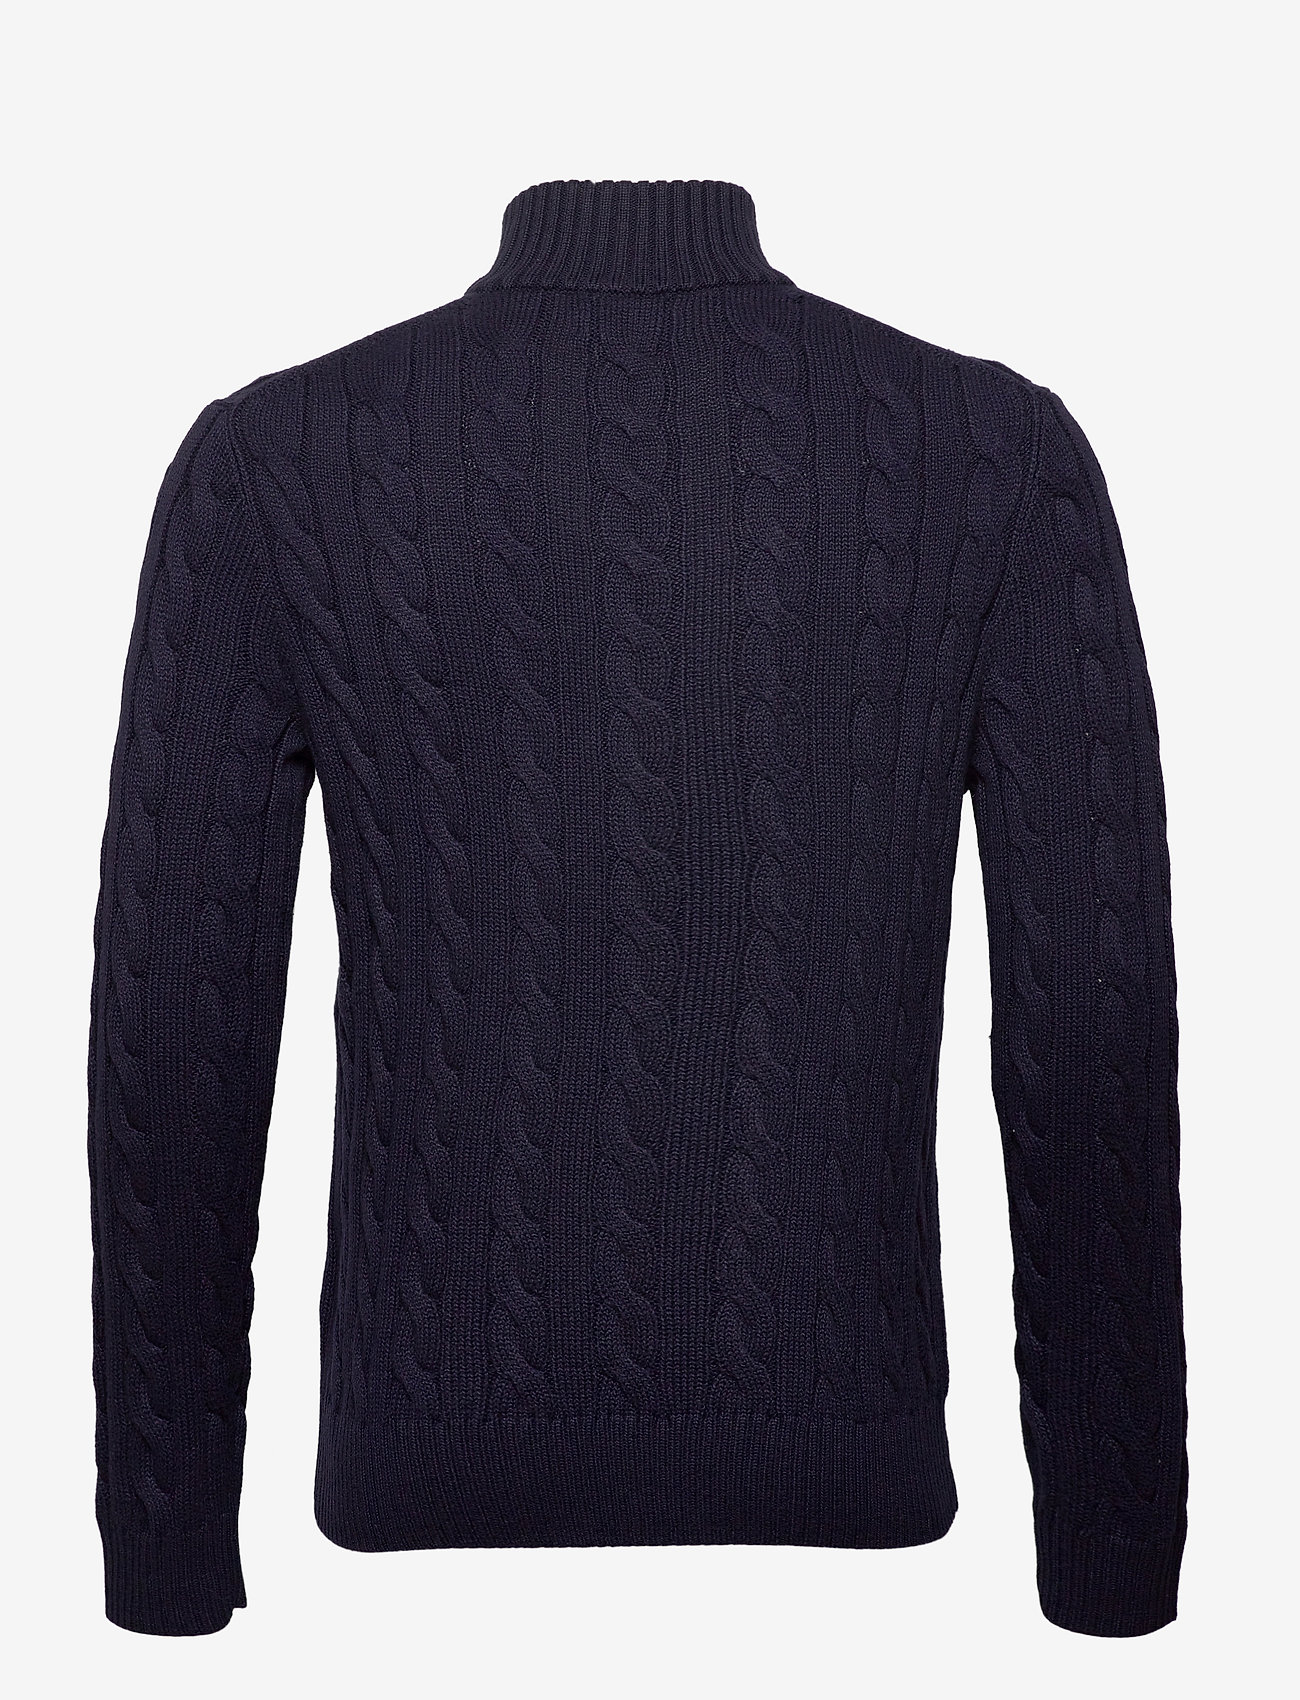 Cable-knit Cotton Sweater (Hunter Navy) (159 €) - Polo Ralph Lauren ...